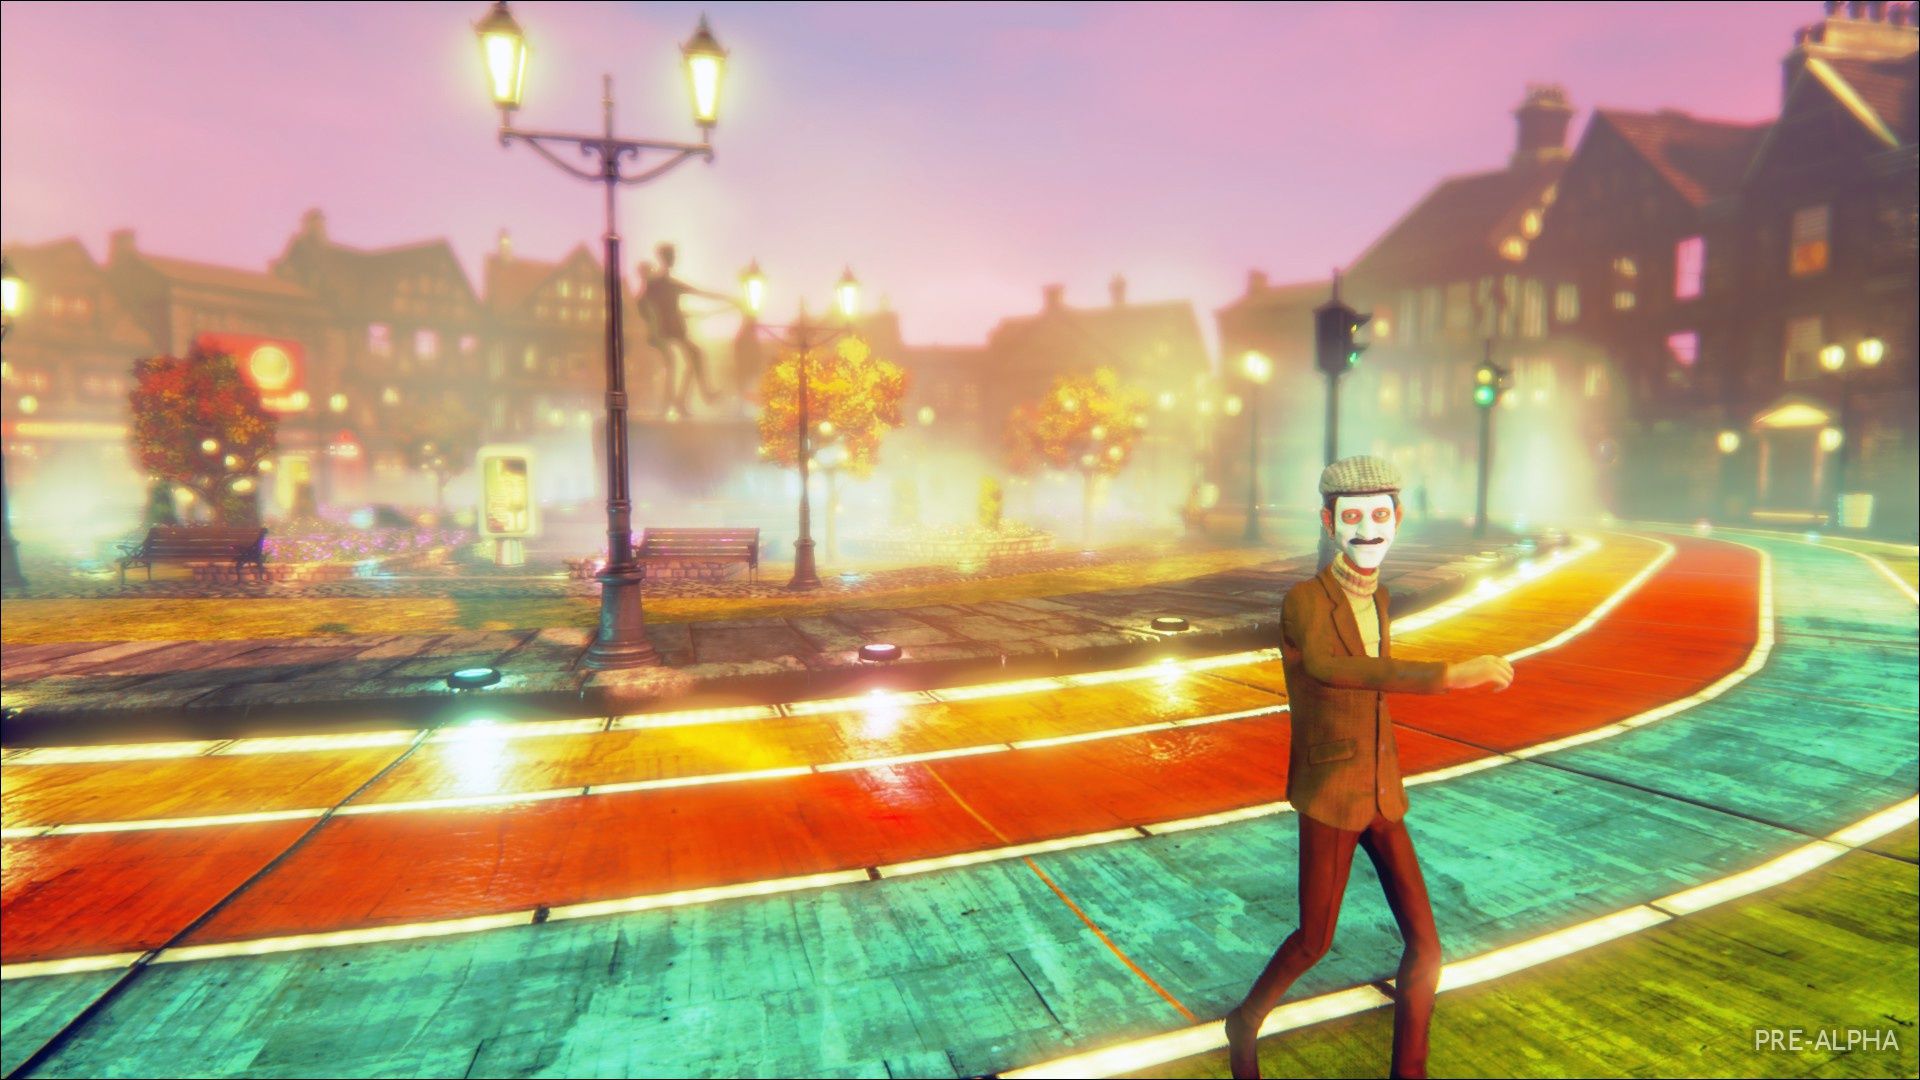 New We Happy Few Trailer Details Revamped Characters & Game Play Mechanics